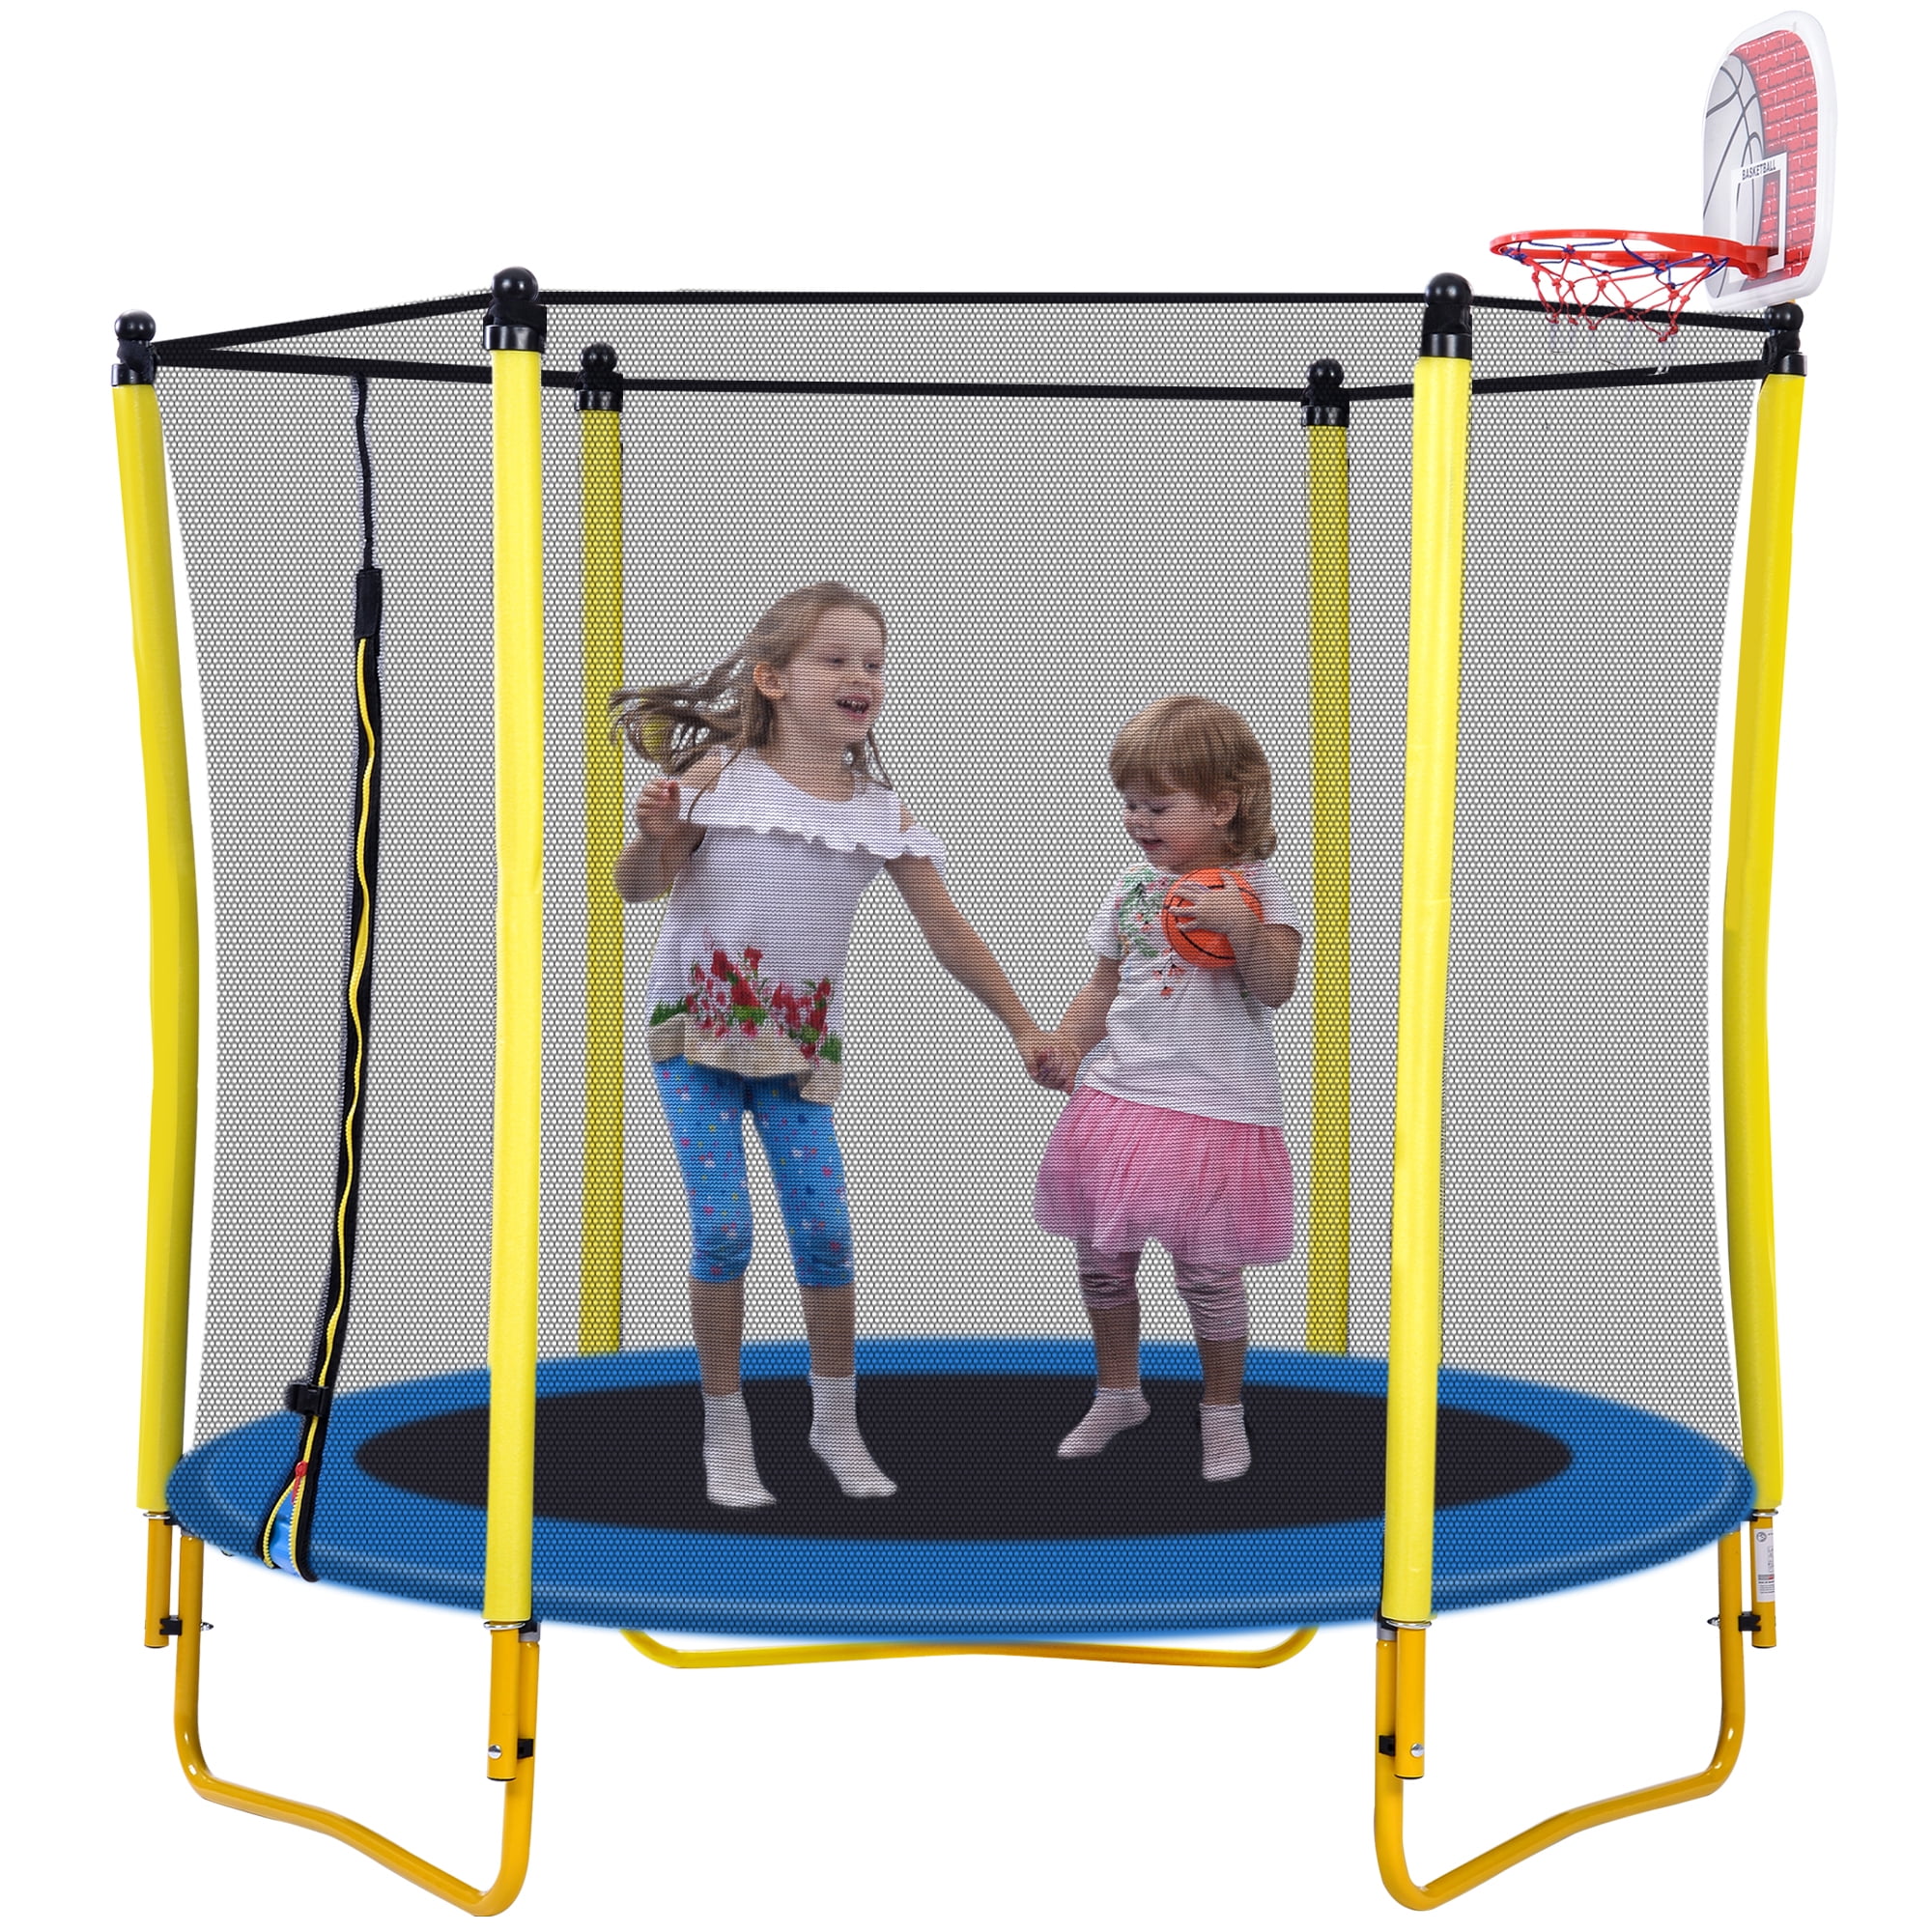 65" Trampoline for Kids - 5.5ft Outdoor & Indoor Mini Toddler Trampoline with Enclosure, Basketball Hoop, Birthday Gifts for Kids, Gifts for Boy and Girl, Baby Toddler Trampoline Toys, Age 1-8